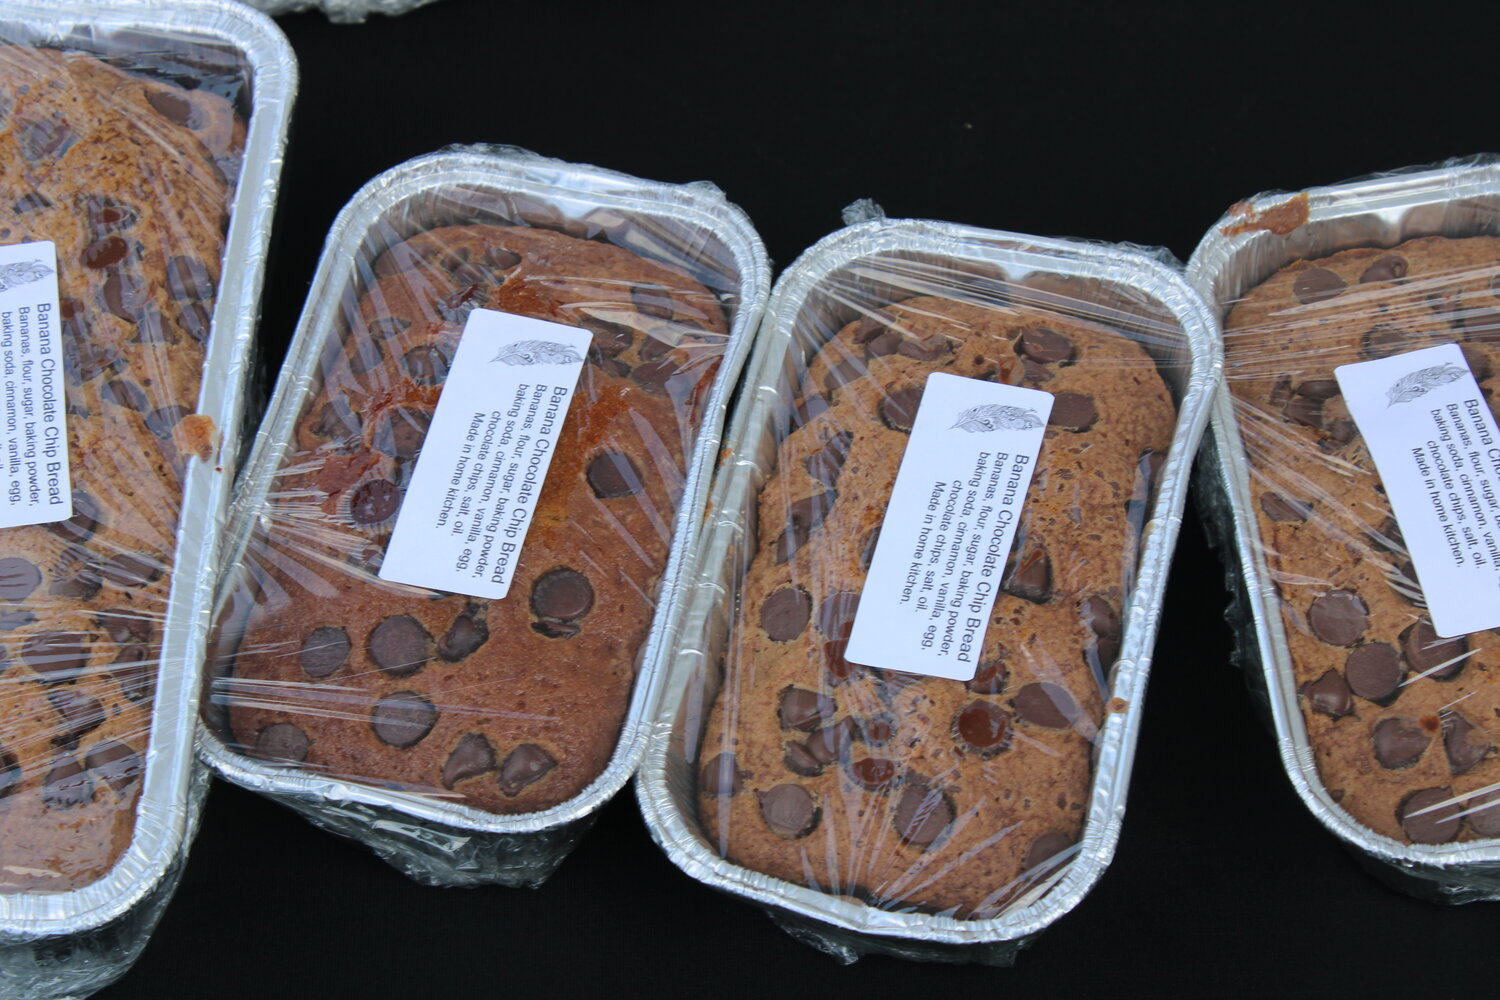 These were some of the breads available to patrons at Sarah Lewis' booth on Aug. 1 in Warrenton.